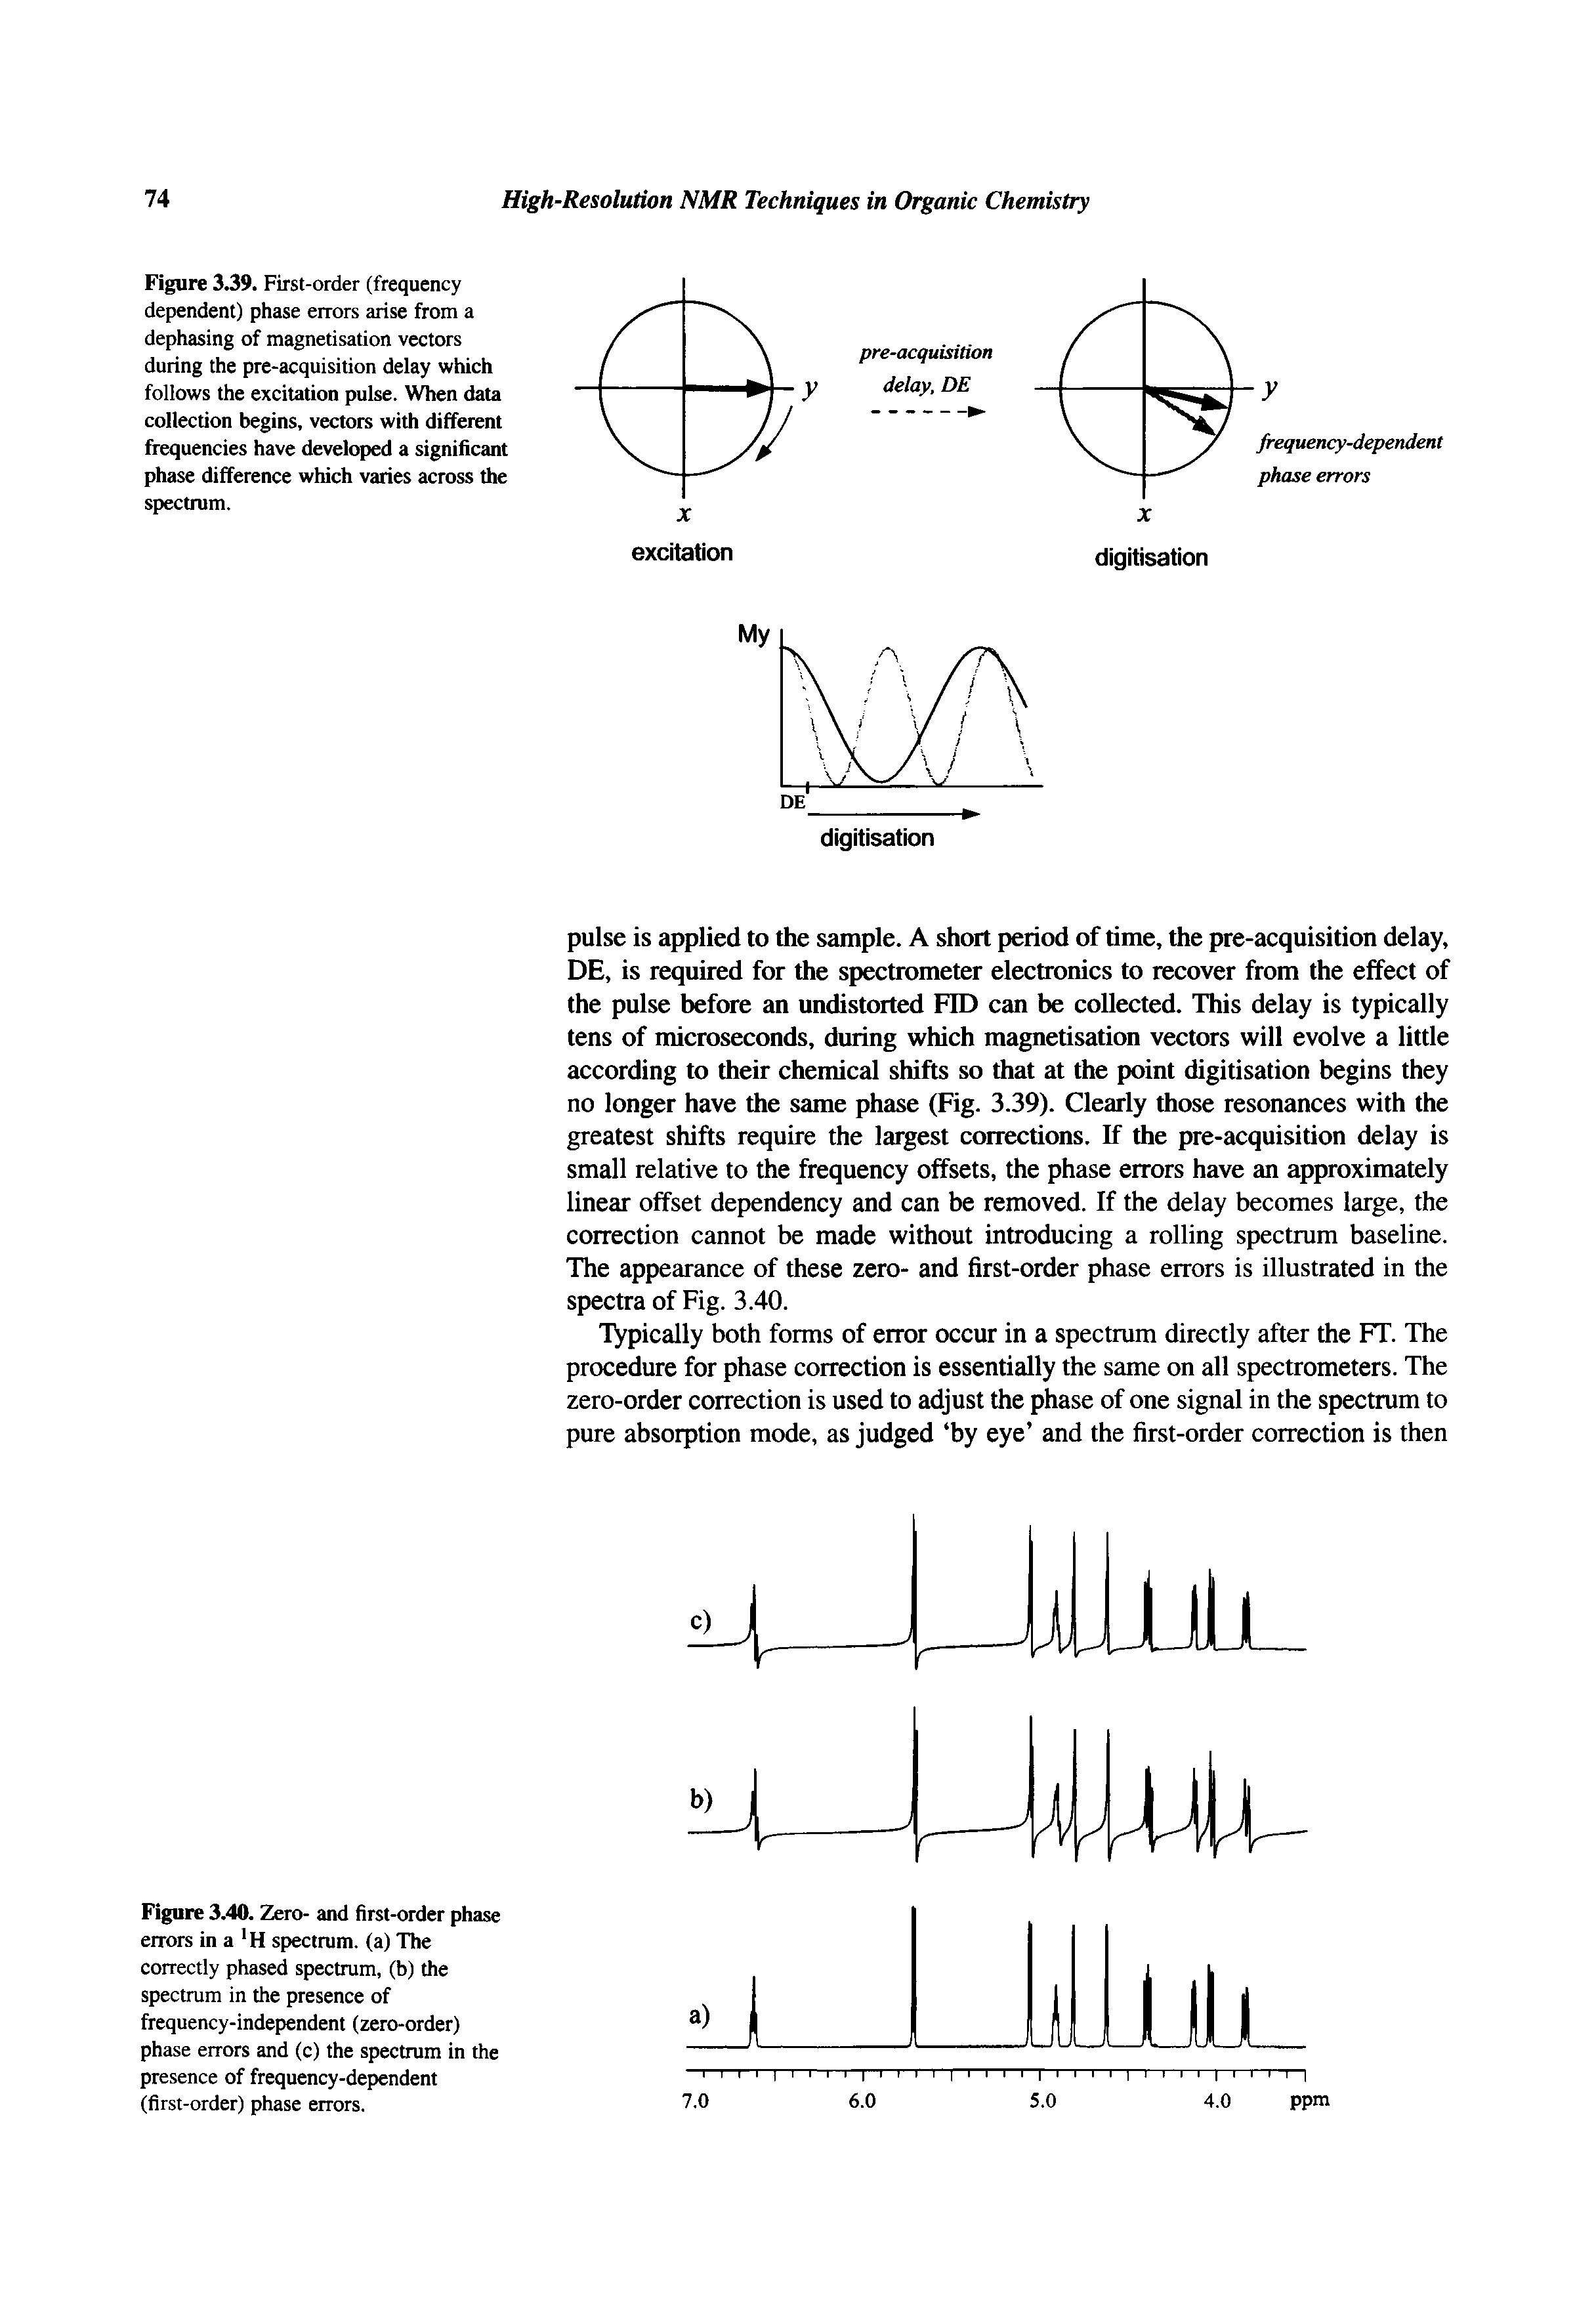 Figure 3.39. First-order (frequency dependent) phase errors arise from a dephasing of magnetisation vectors during the pre-acquisition delay which follows the excitation pulse. When data collection begins, vectors with different frequencies have developed a significant phase difference which varies across the spectrum.